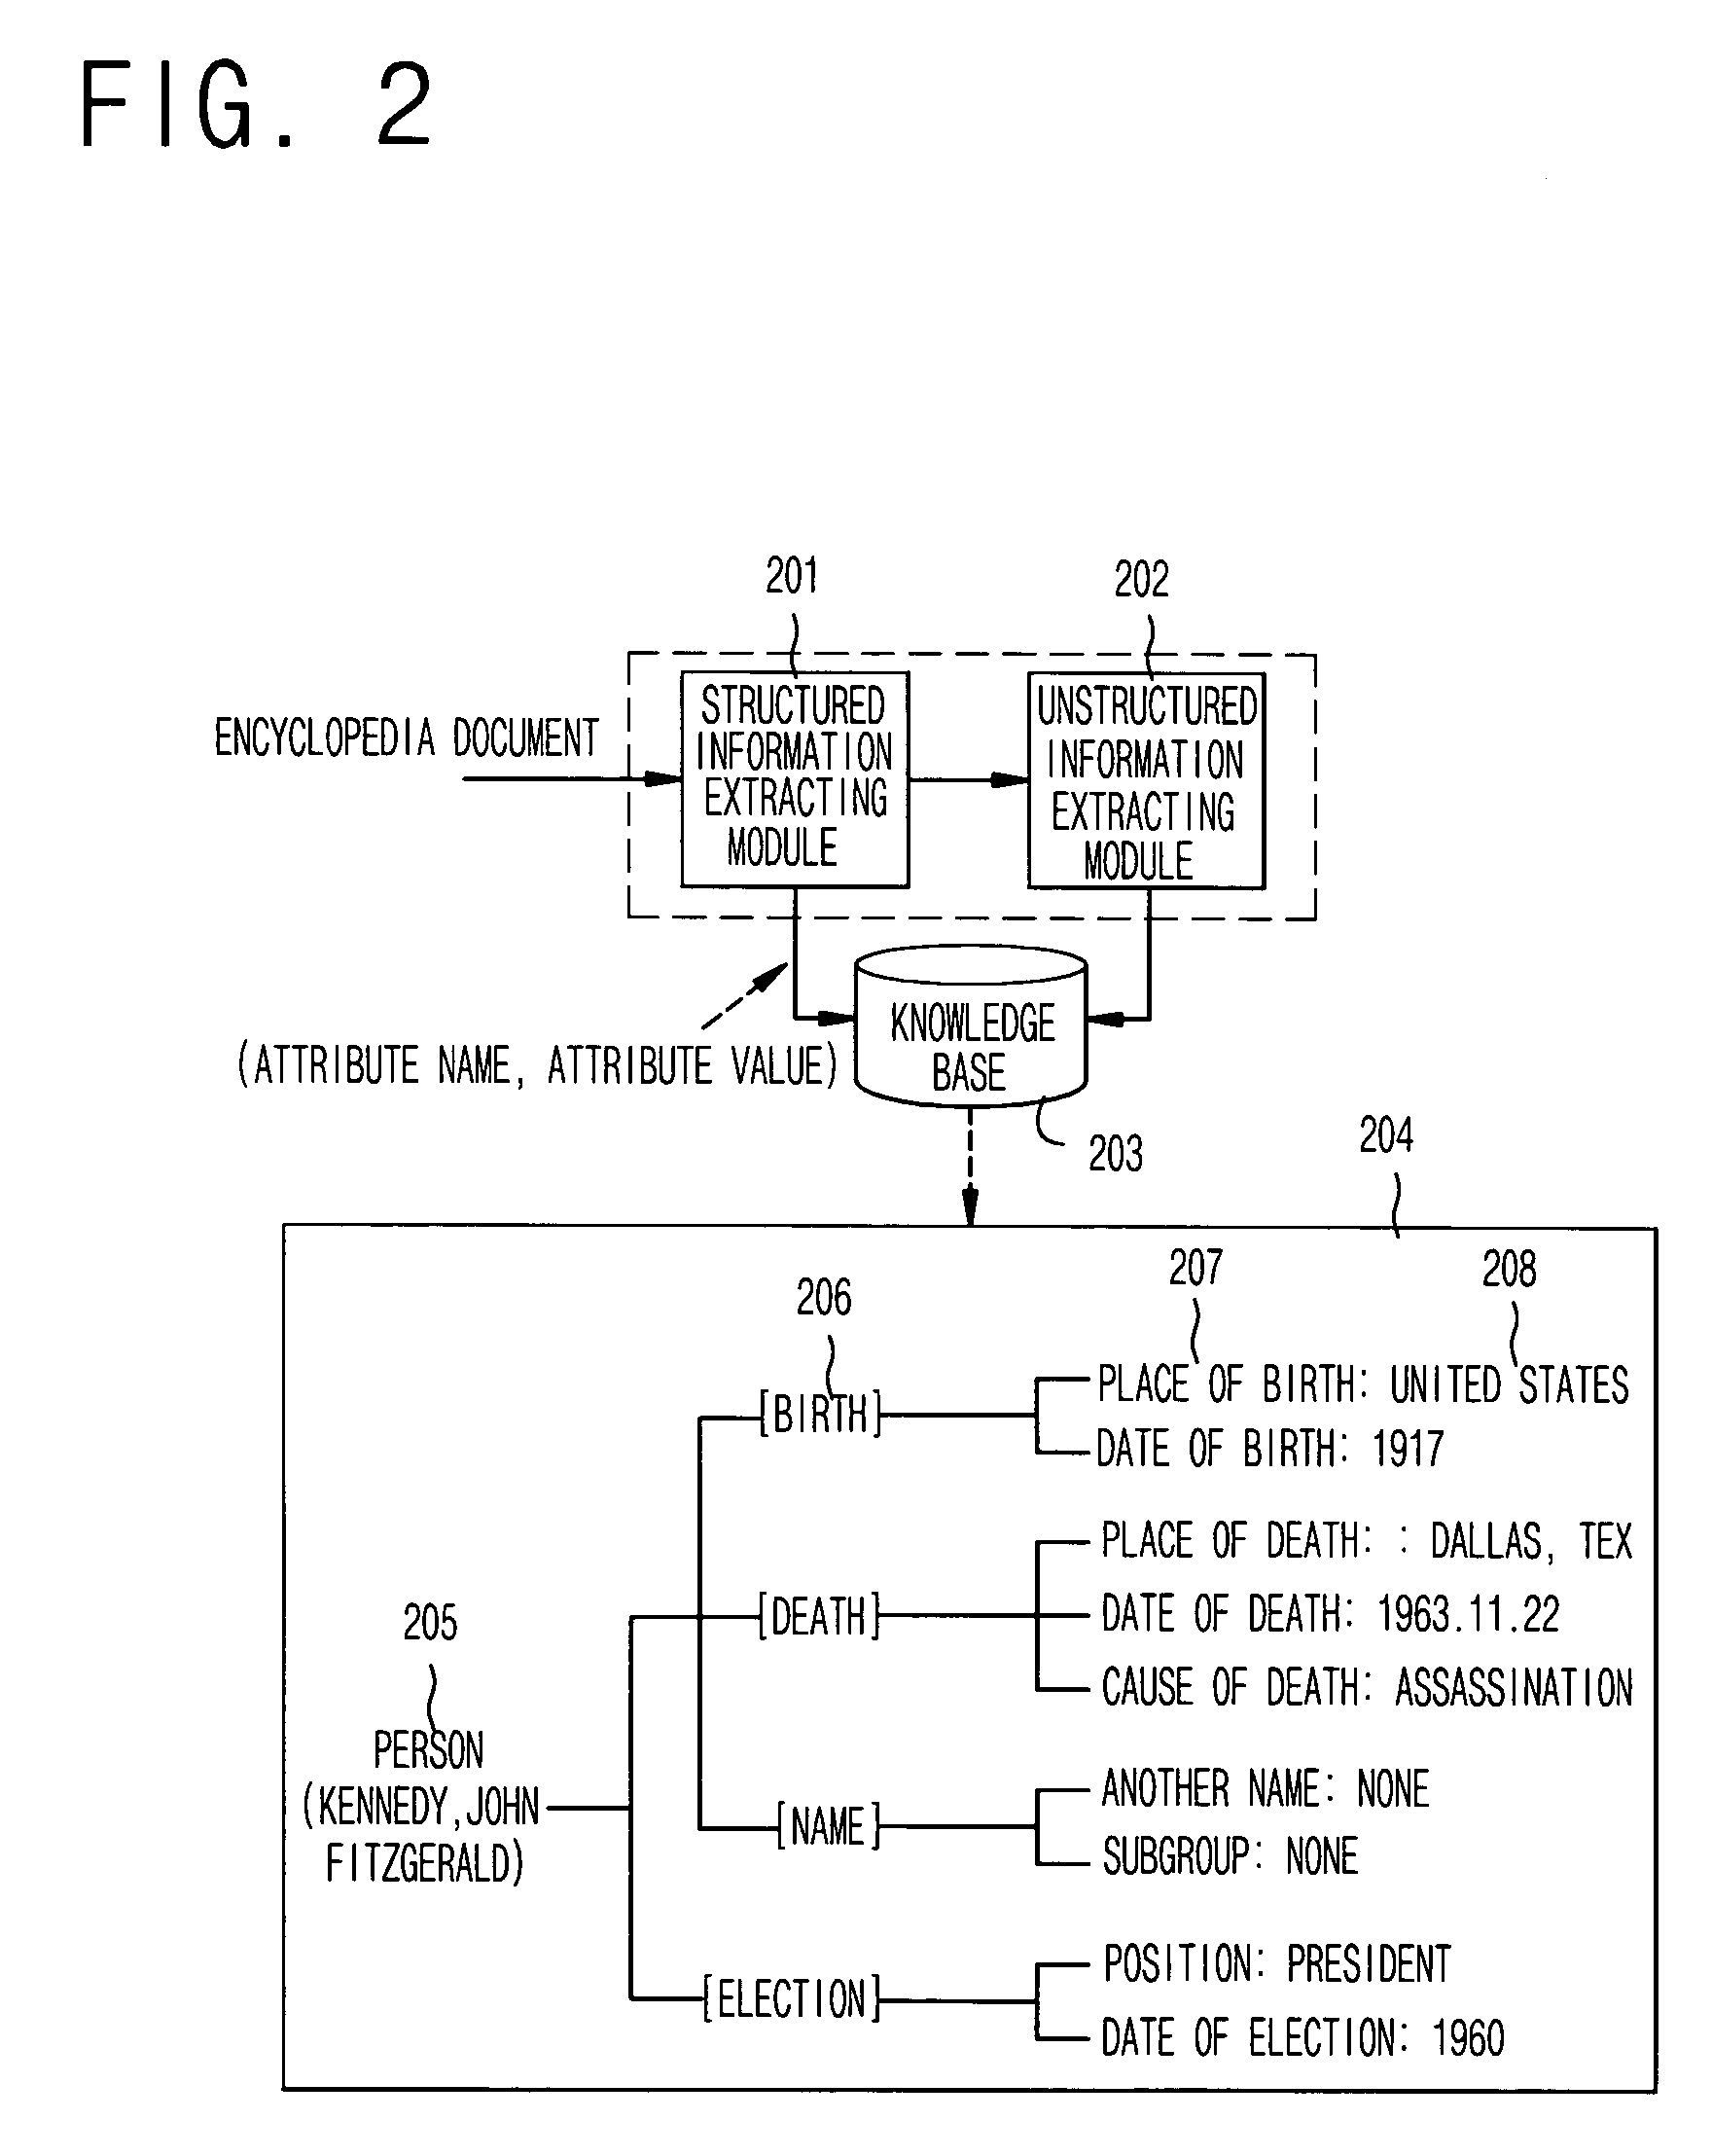 Semi-automatic construction method for knowledge base of encyclopedia question answering system